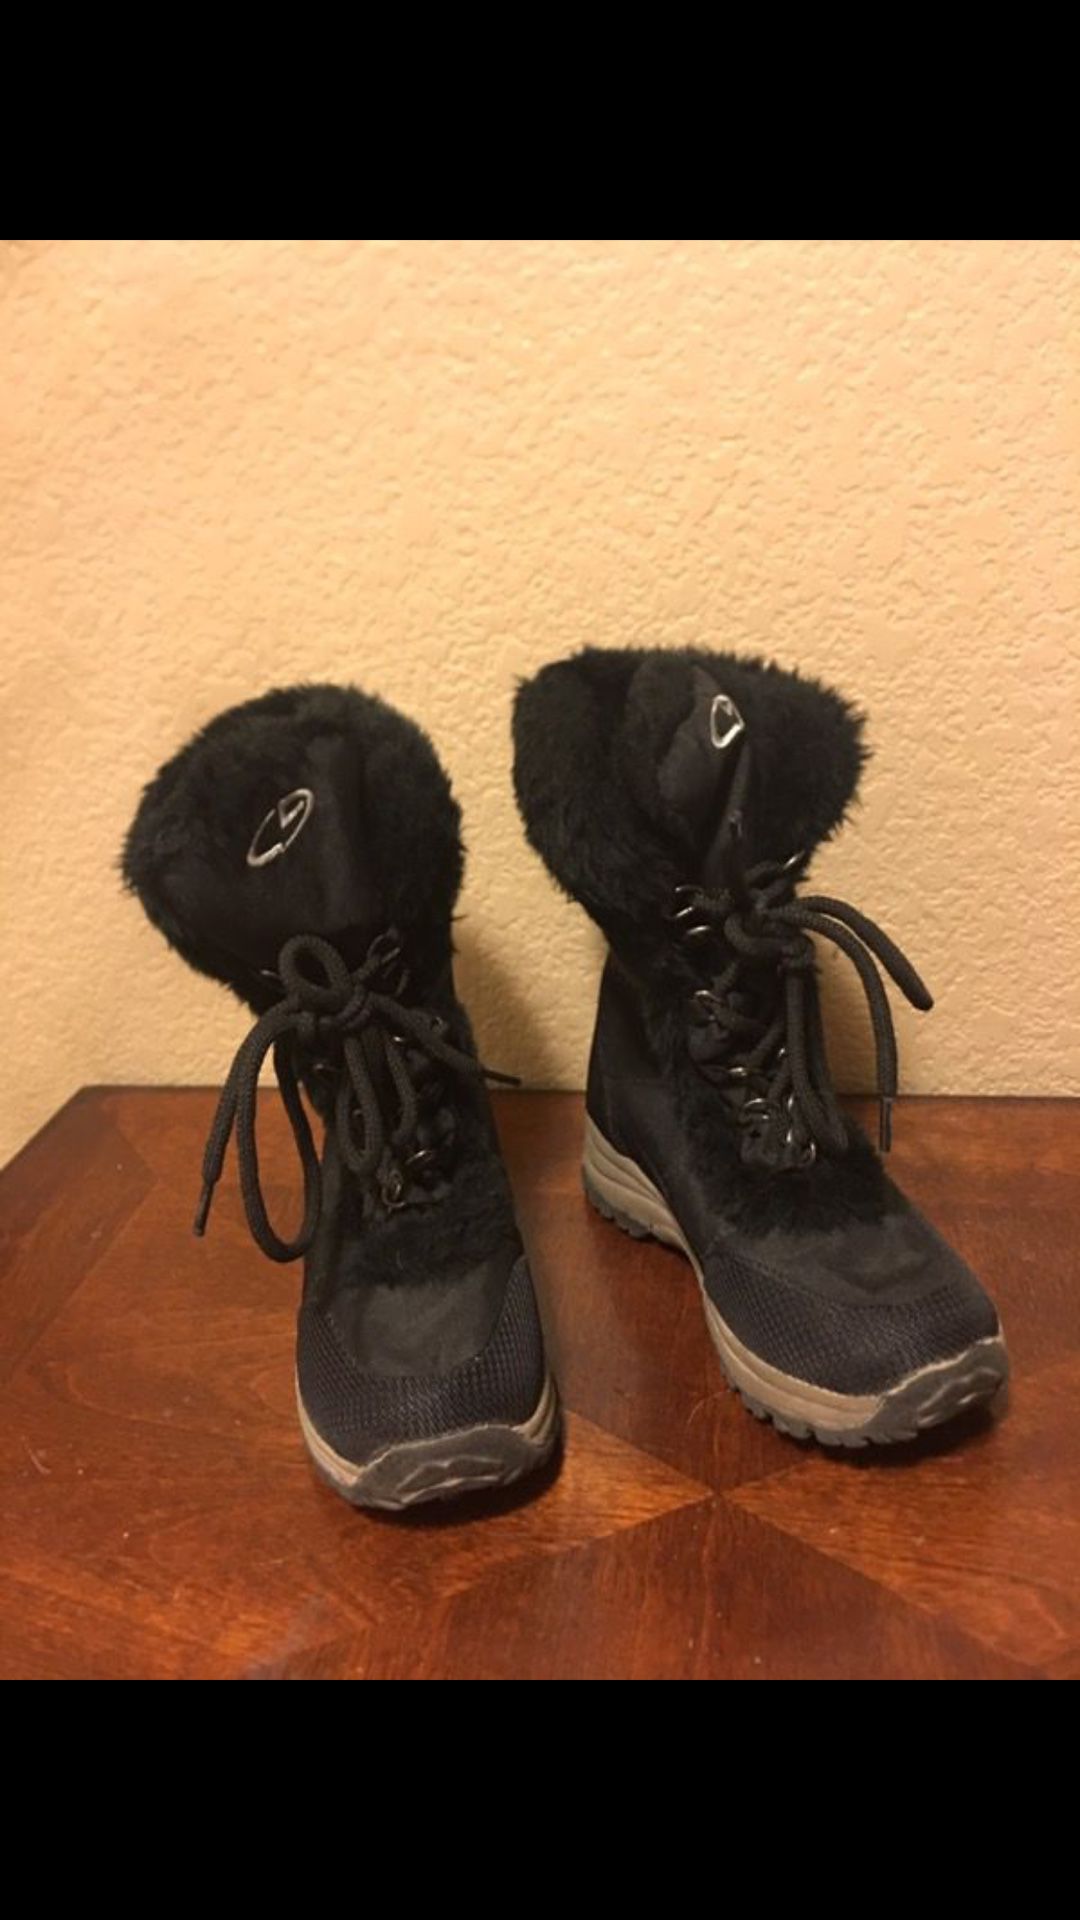 Girls snow boots size 12